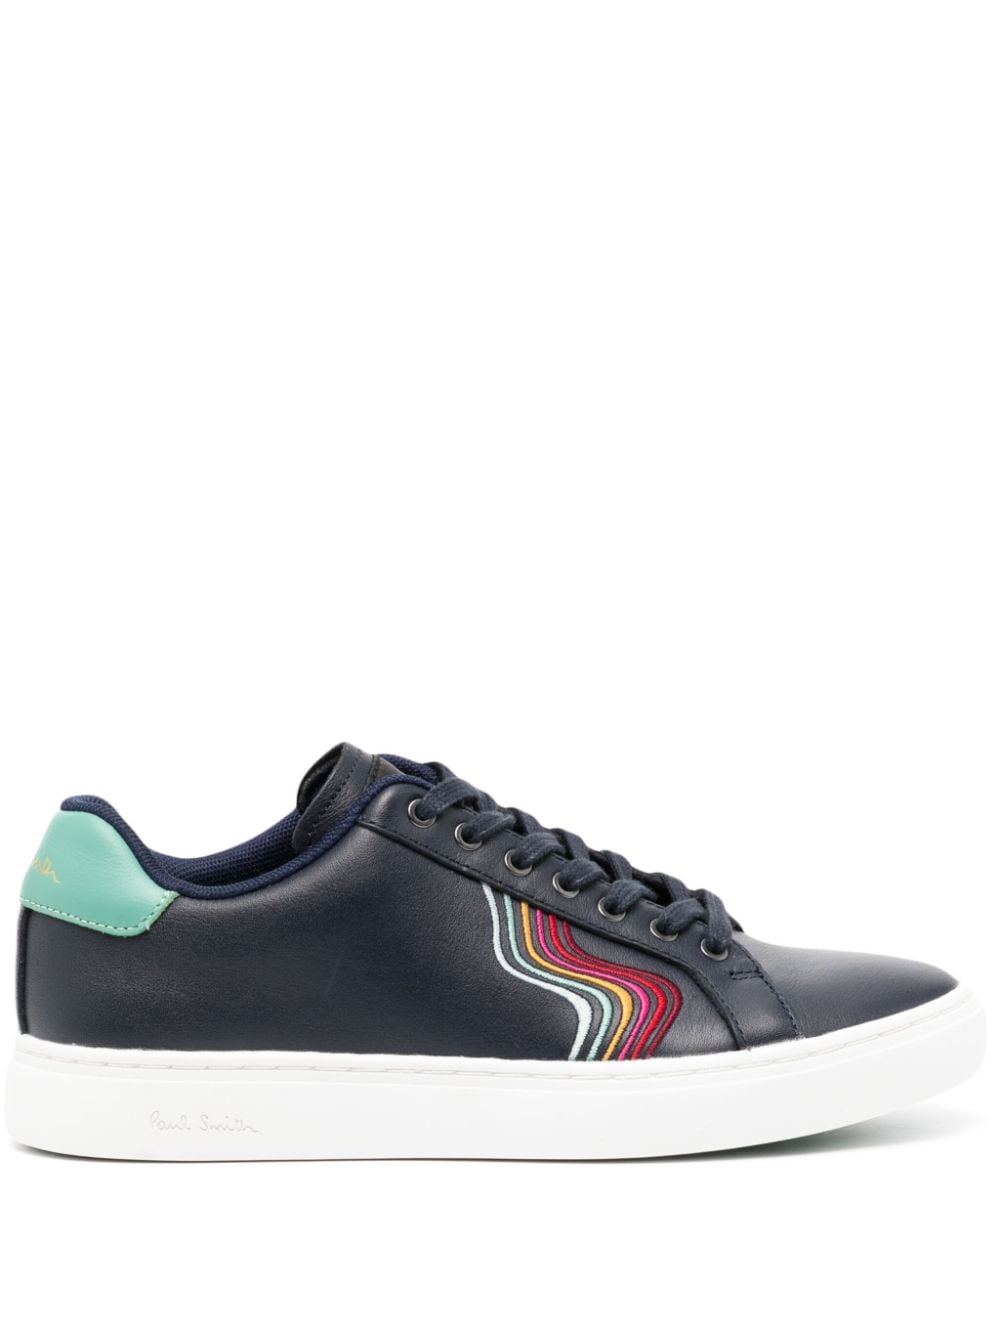 Paul Smith Lapin leather sneakers - Blue von Paul Smith